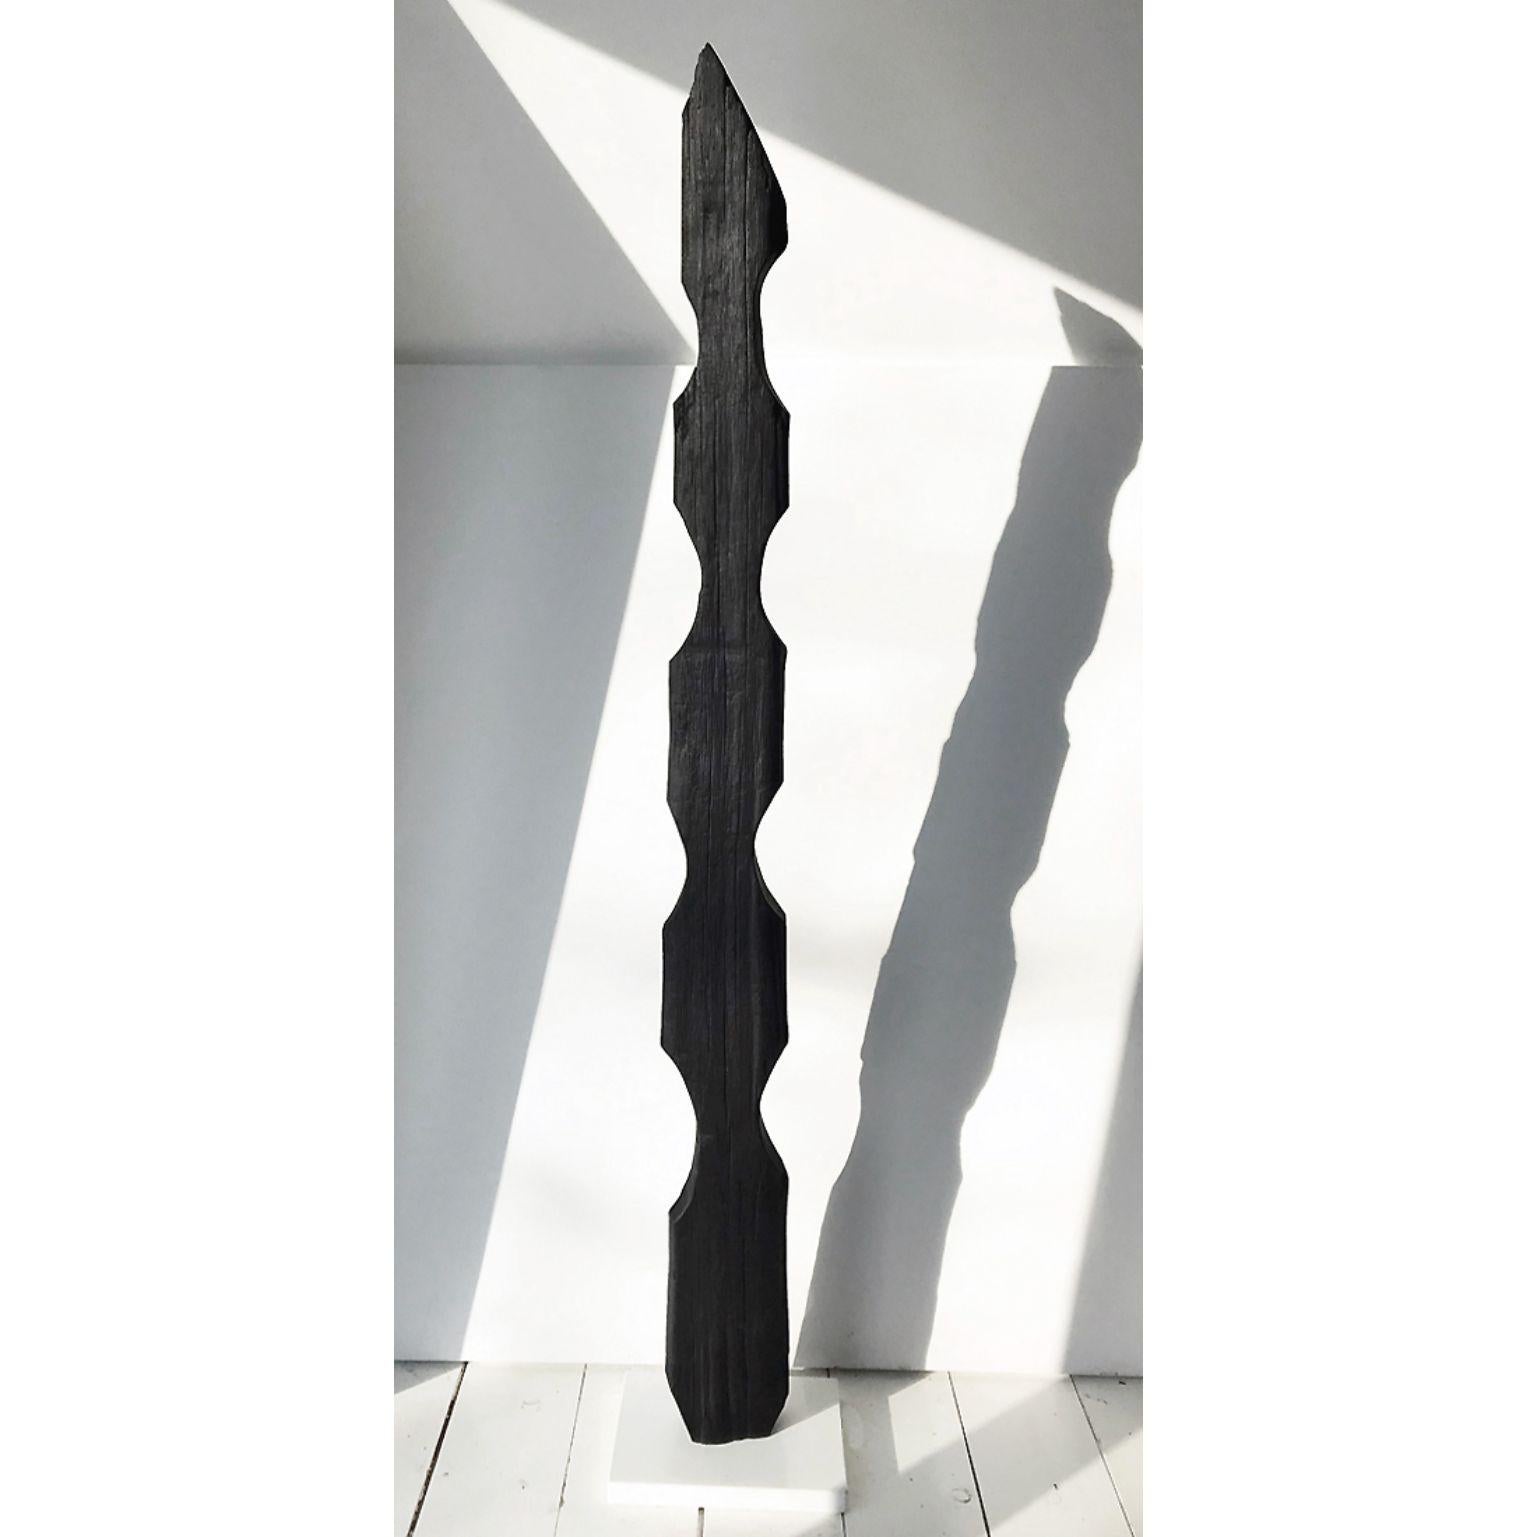 Untitled 31 by Neshka
Dimensions: 30 x 13 x 183 cm
Material: Charred Cedar

Neshka (Agnieszka Krusche), is a native of Kraków, Poland, and a graduate of Alberta University of the Arts in Calgary, Canada.
Since graduating from the Visual